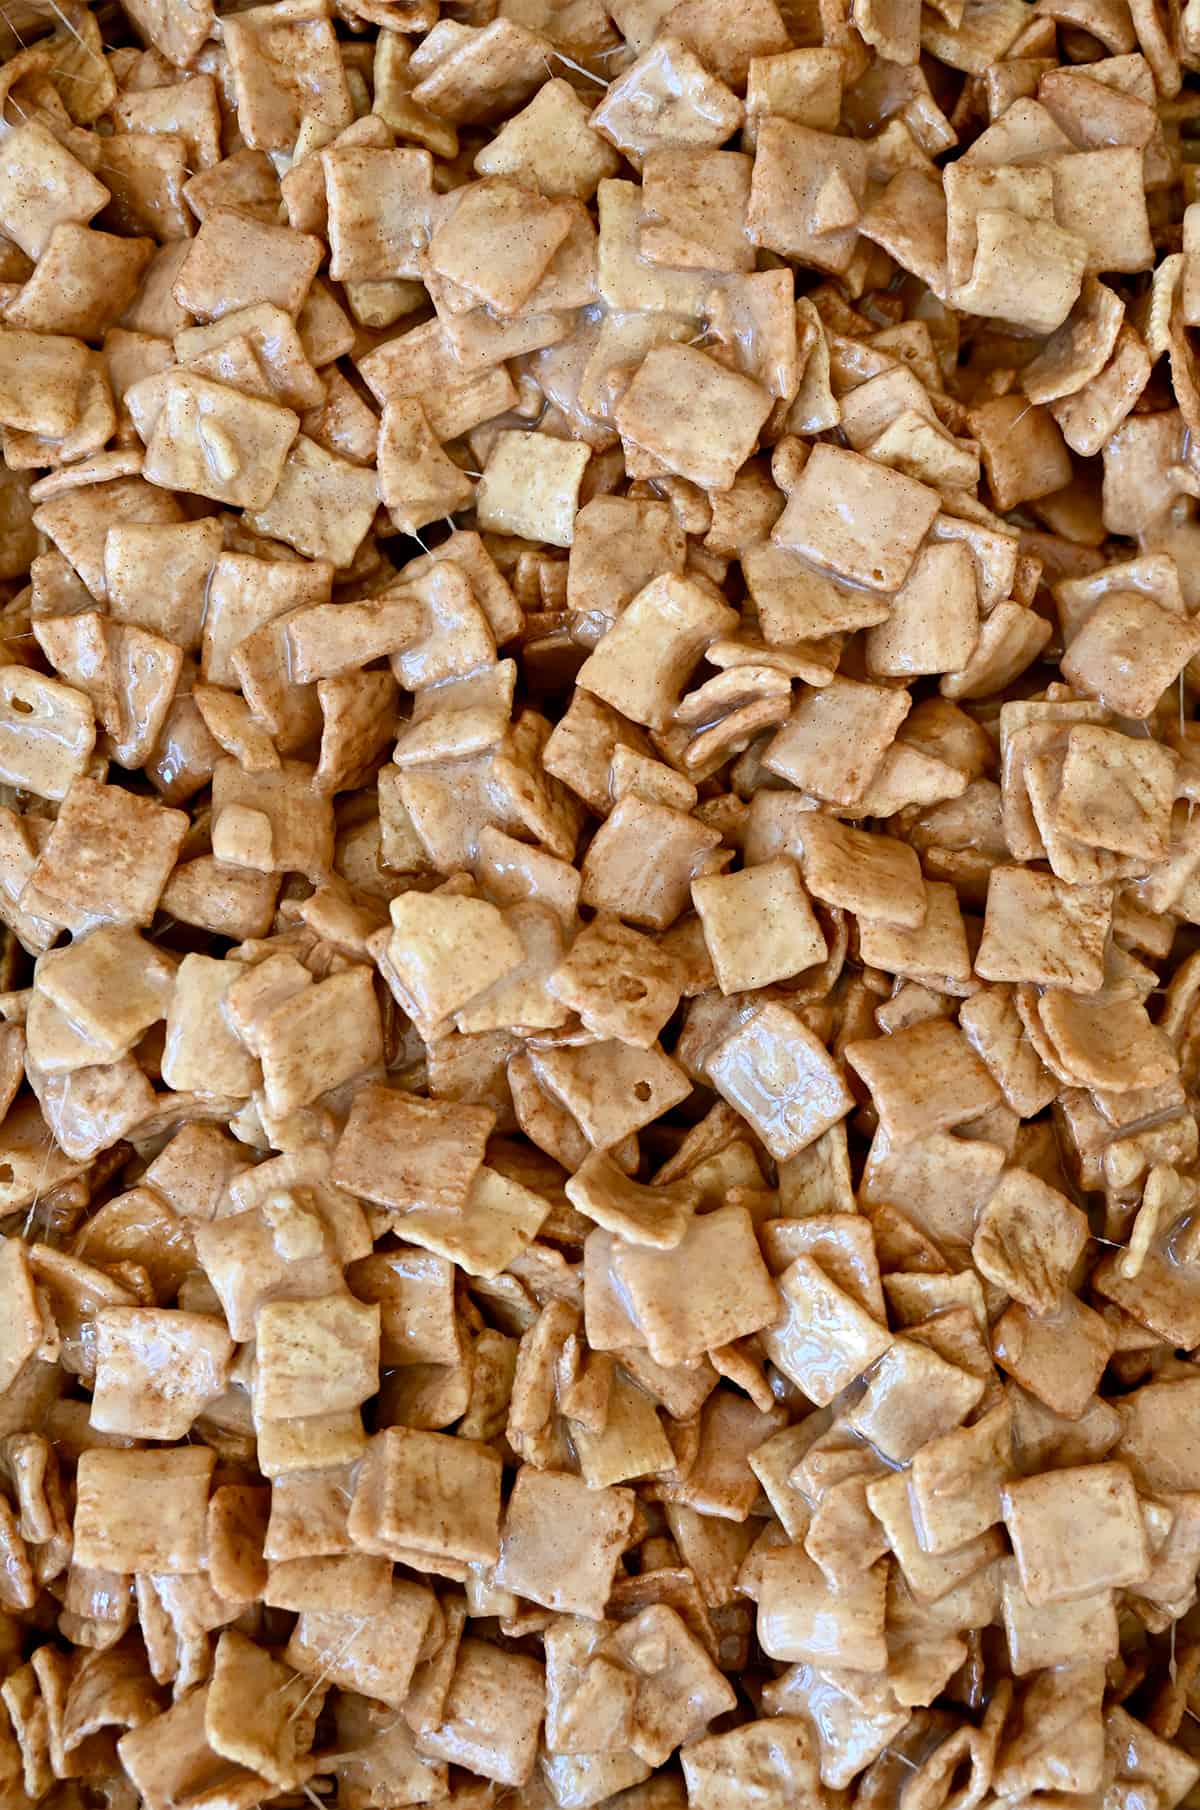 Gooey Cinnamon Toast Crunch bars before being sliced into squares.